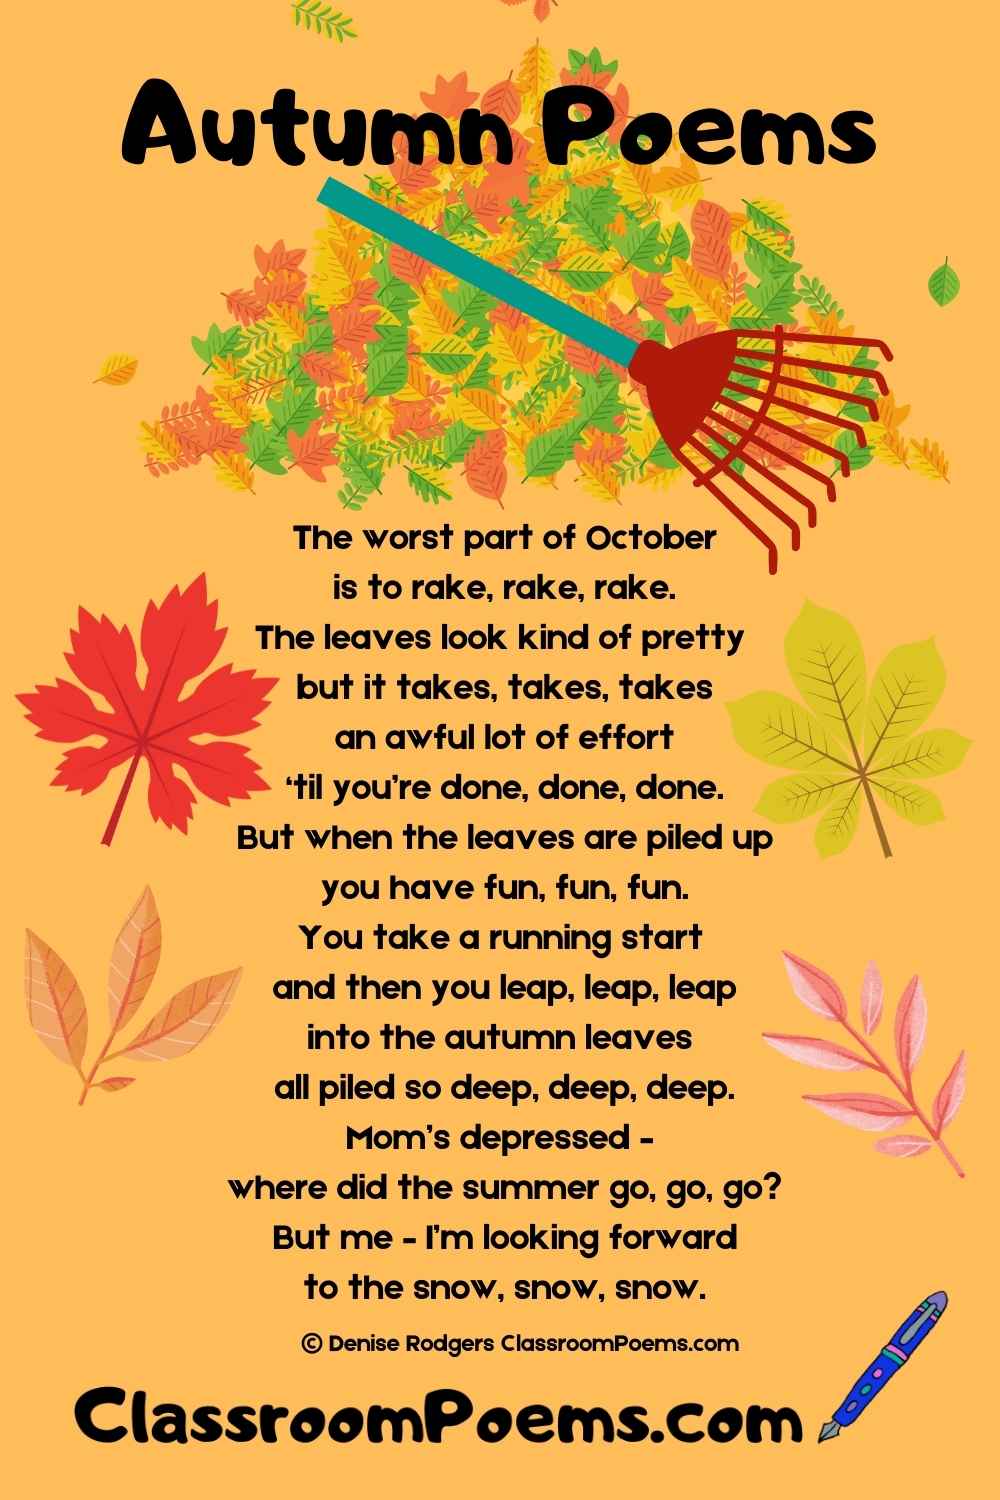 Autumn poems for kids by Denise Rodgers on ClassroomPoems.com.